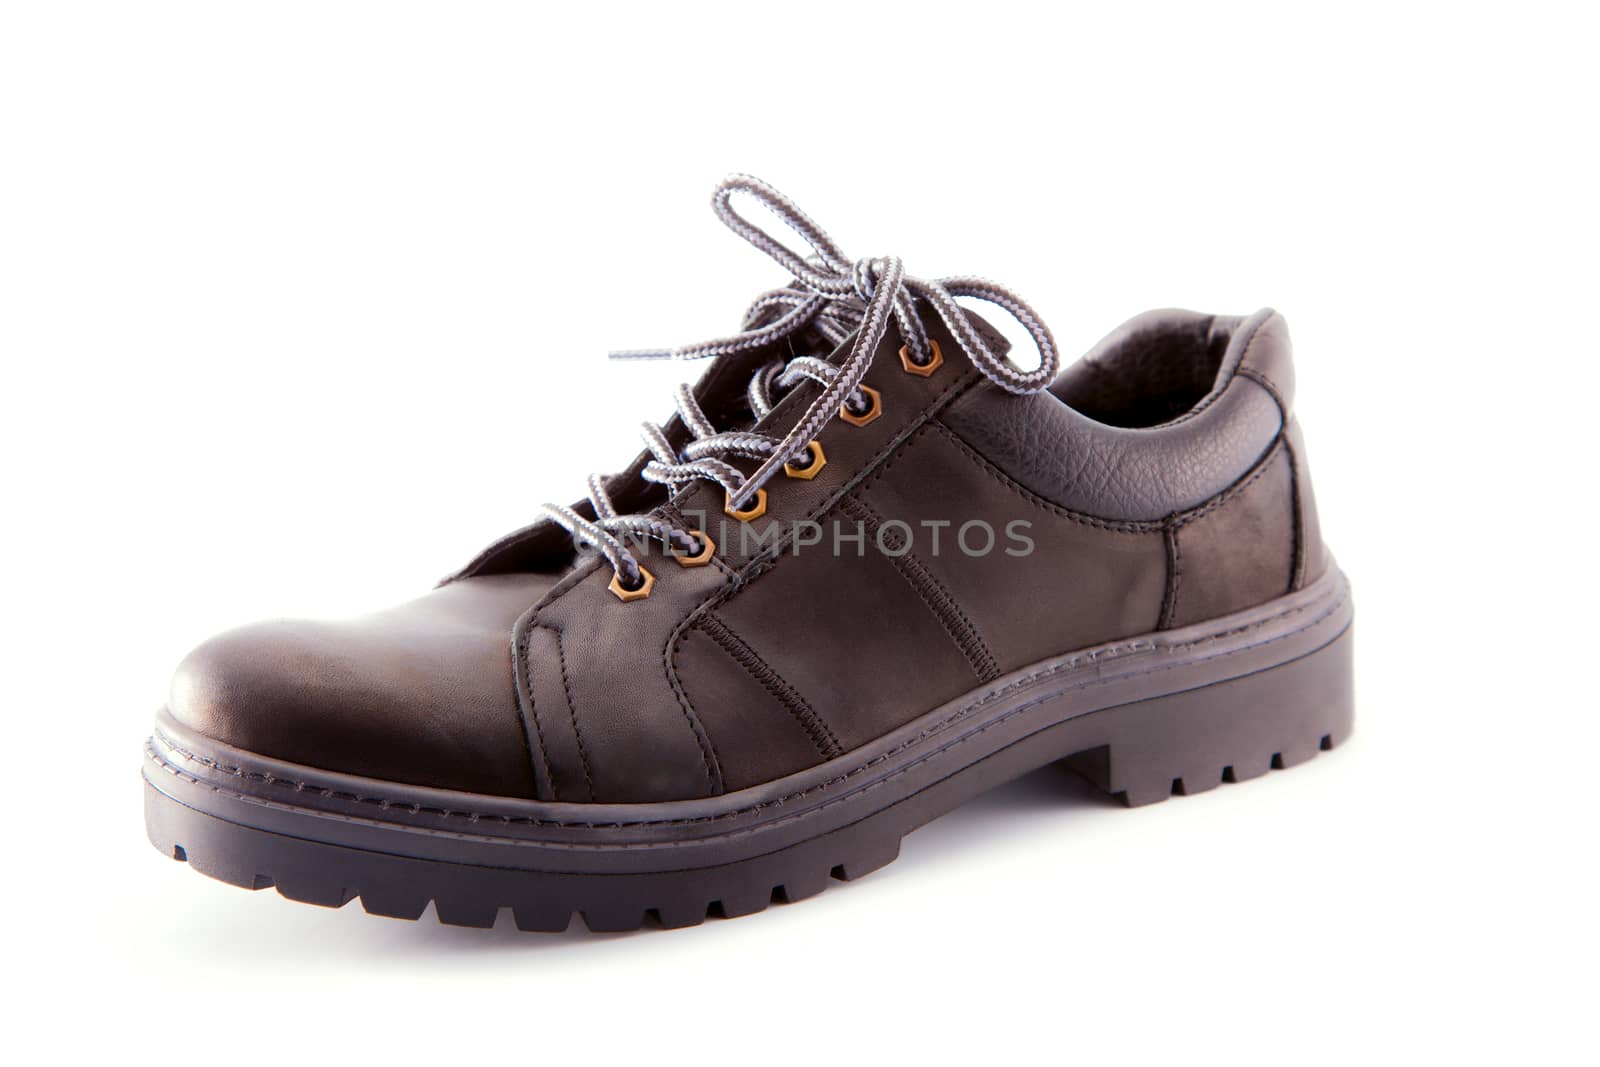 one fashionable black boot on white background